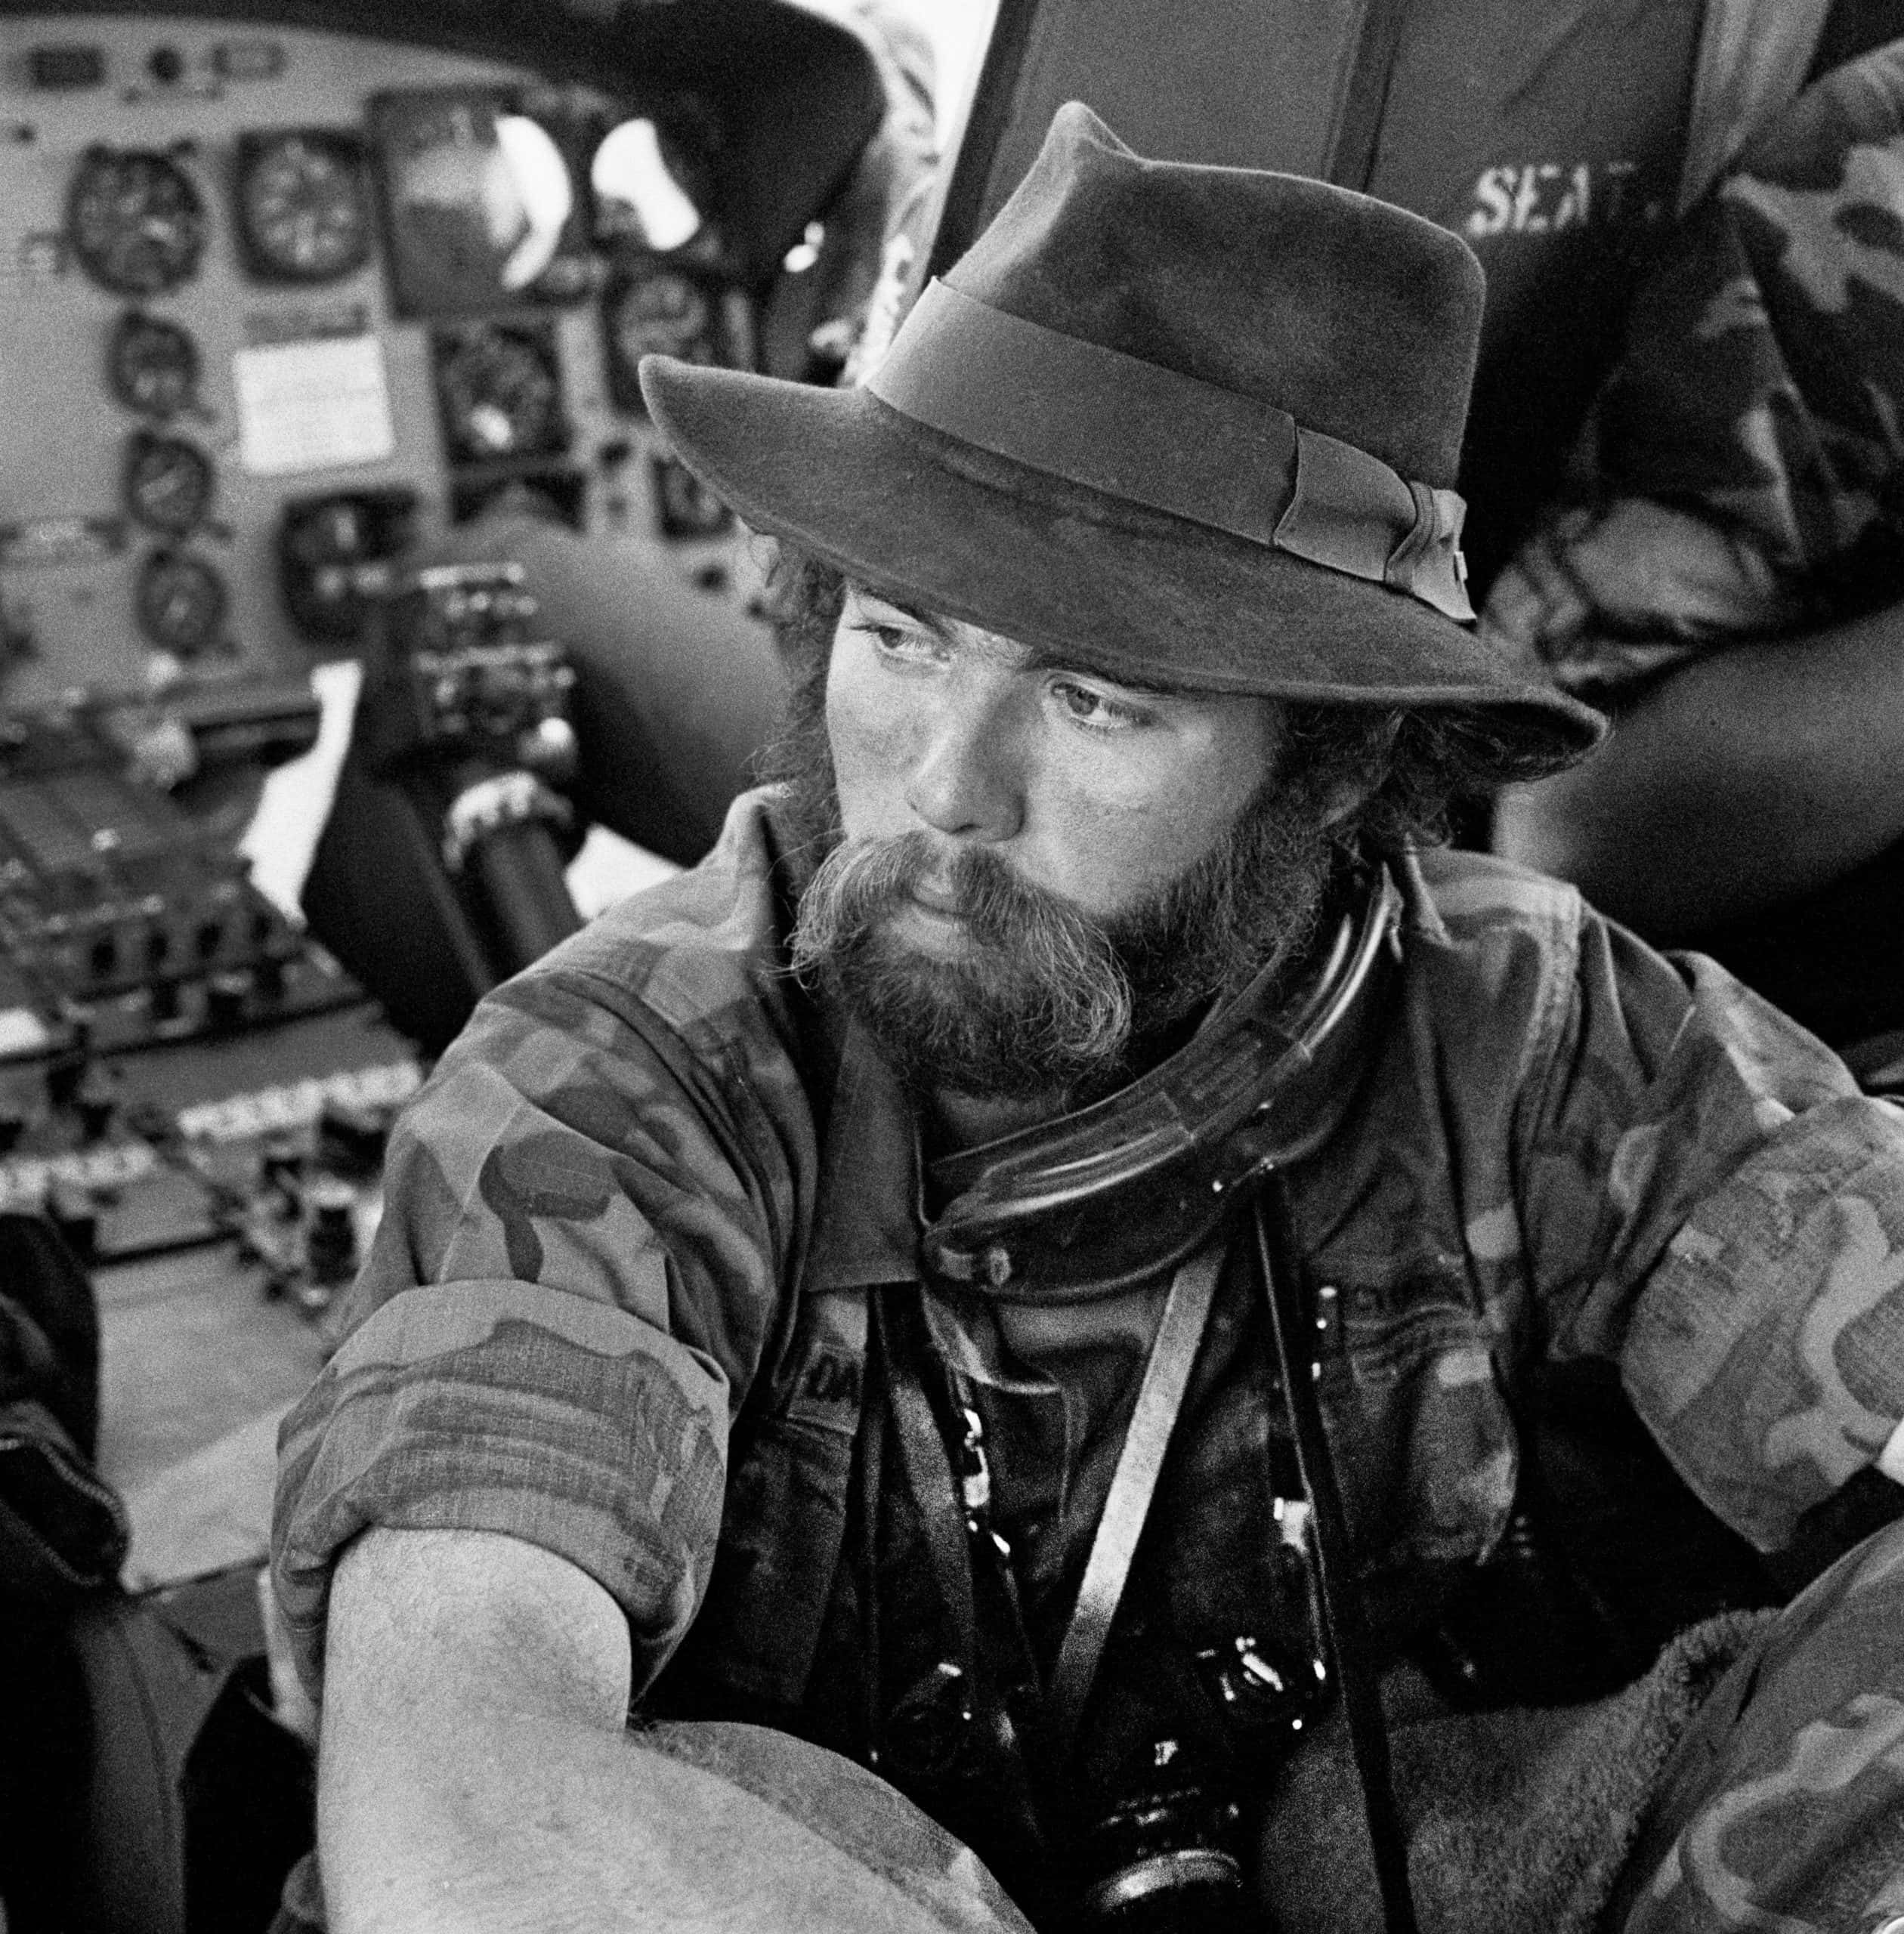 In a helicopter on the way to a hot LZ near Pleiku wearing my signature fedora (photo by Matt Franjola)